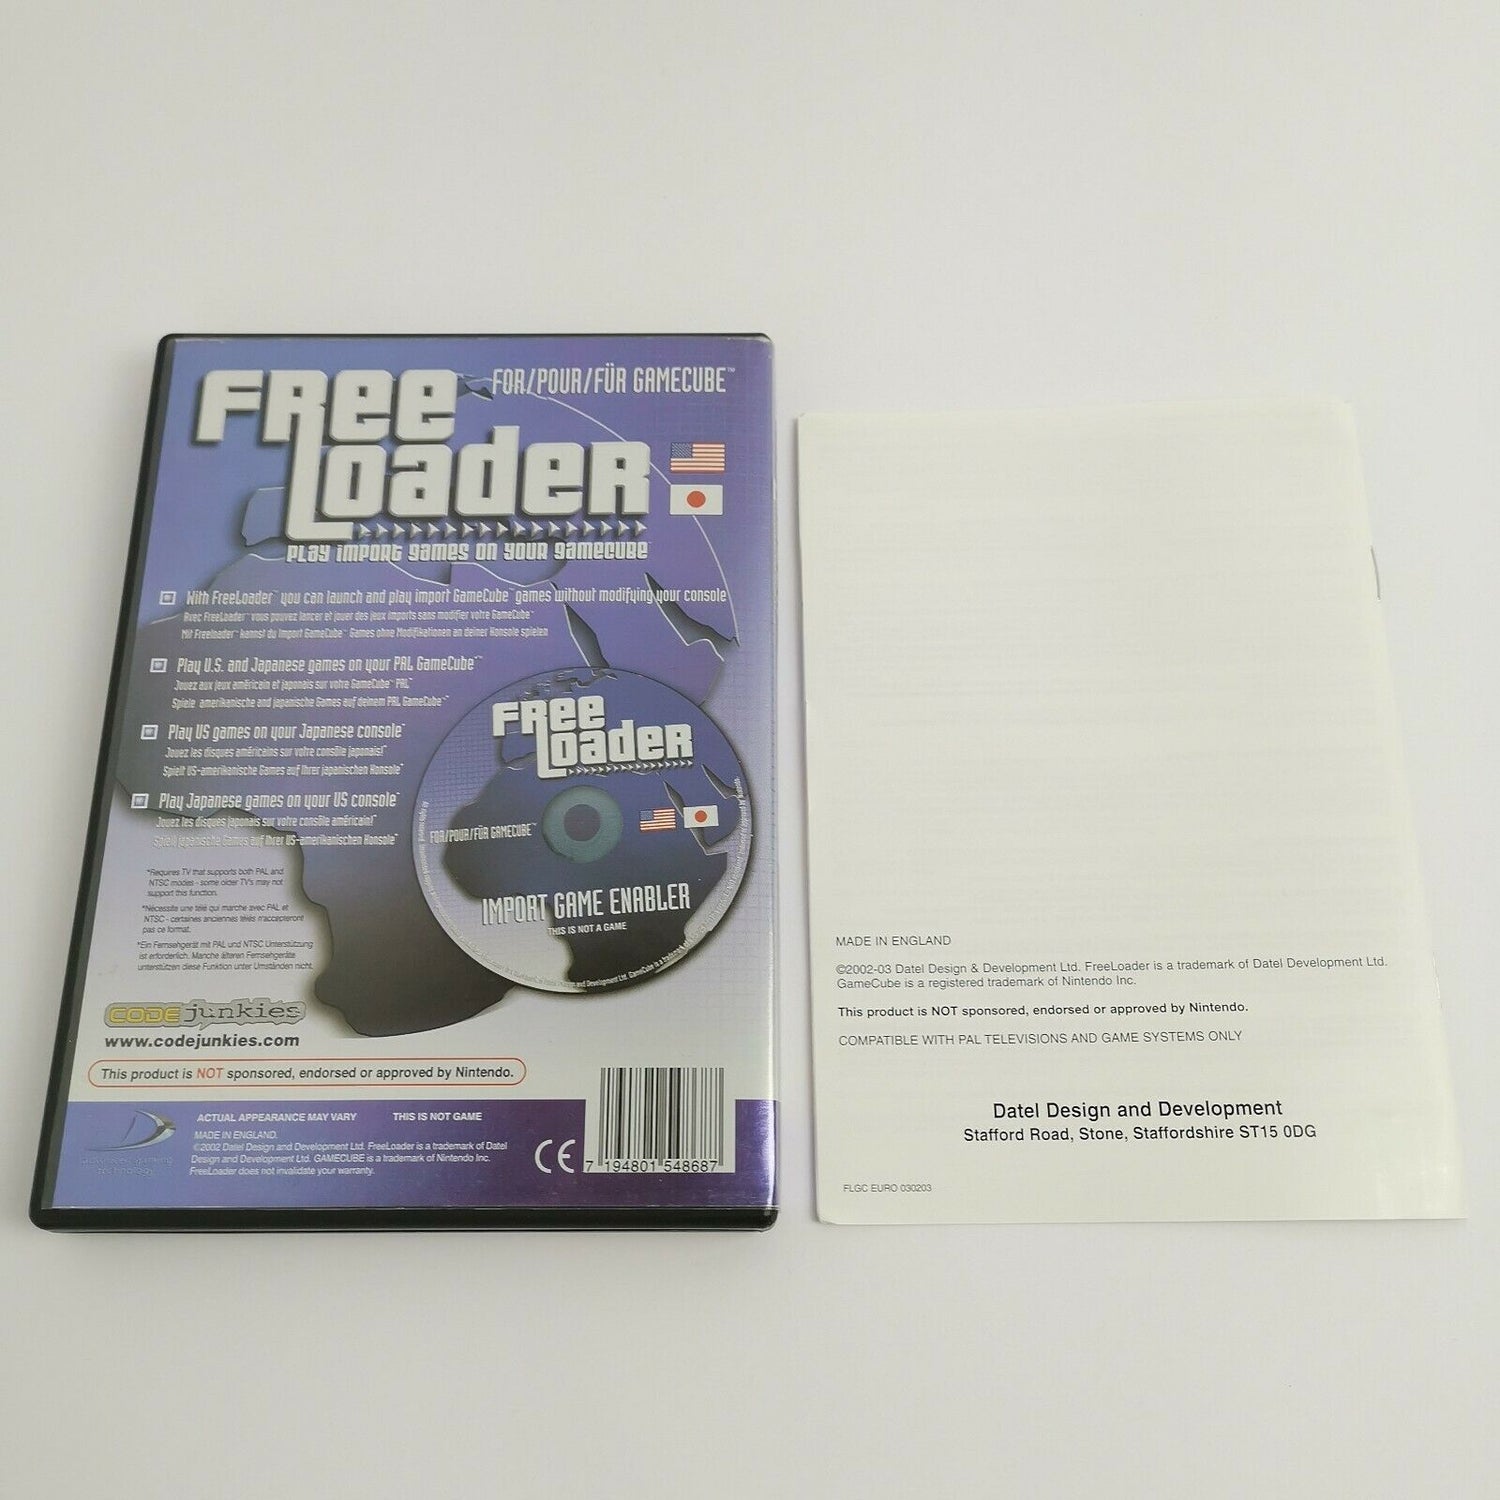 Freeloader Play Import Games on your Gamecube Game Accessories | Nintendo | Original packaging